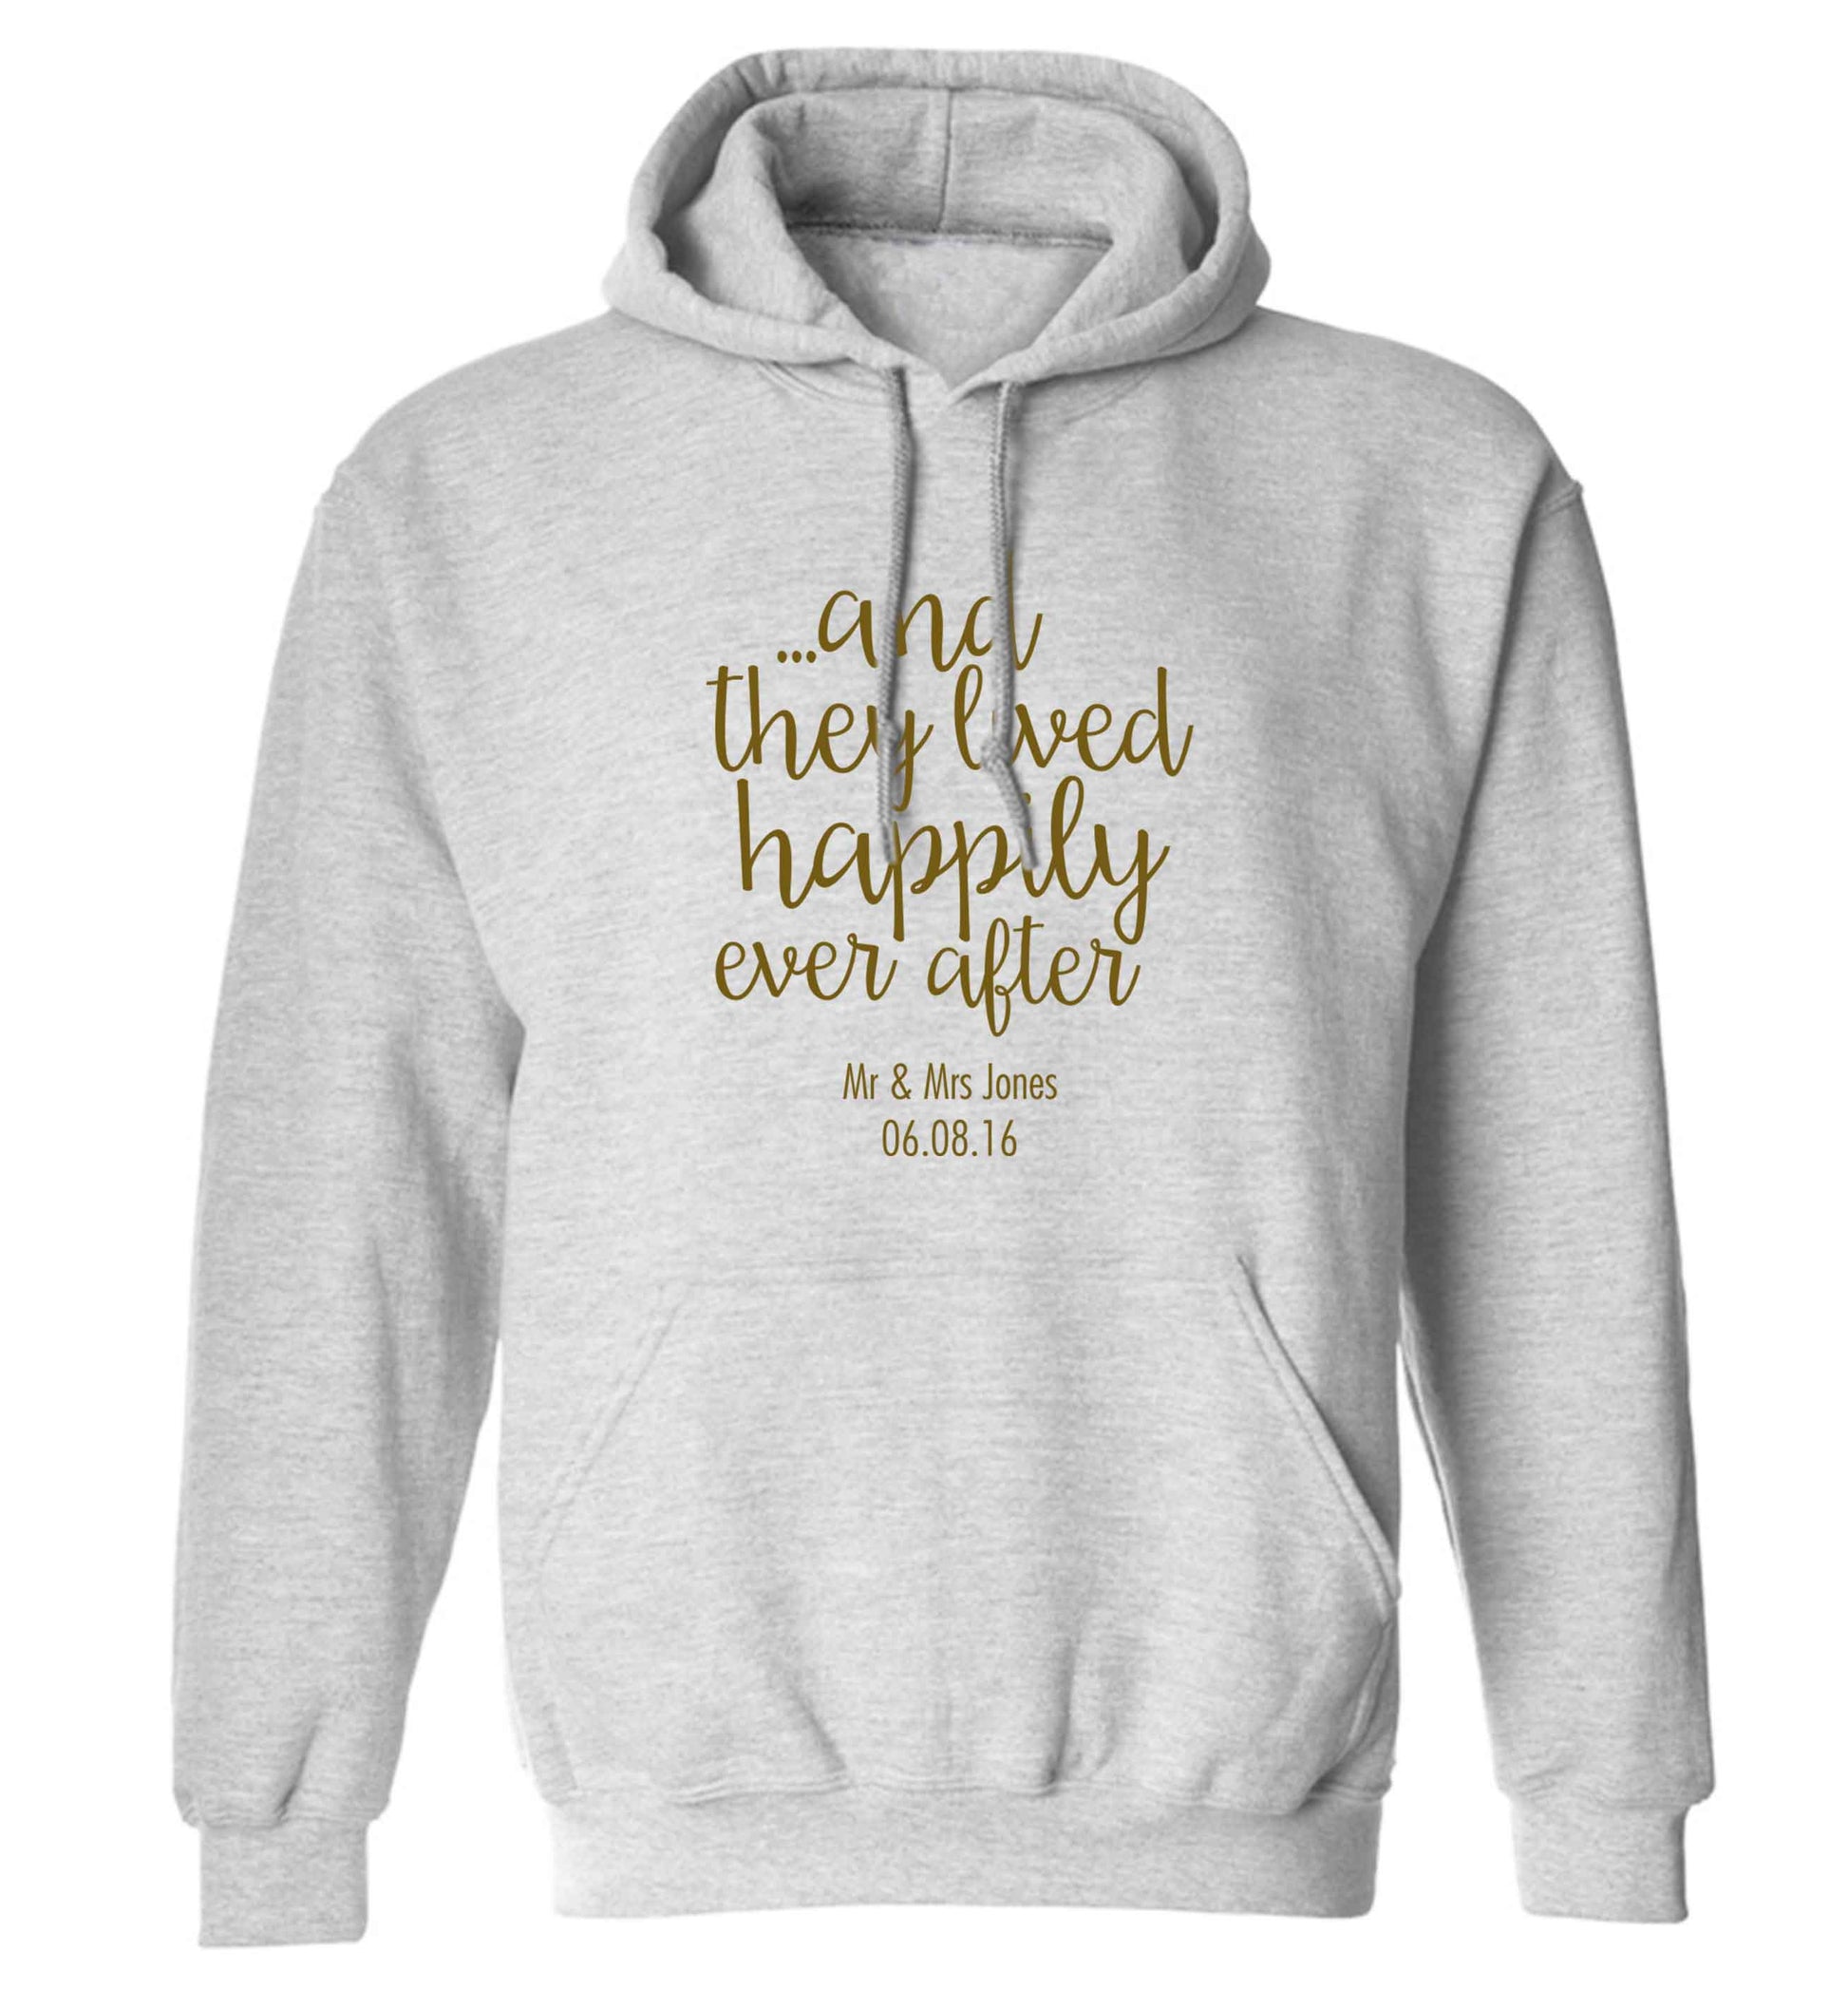 ...and they lived happily ever after - personalised date and names adults unisex grey hoodie 2XL